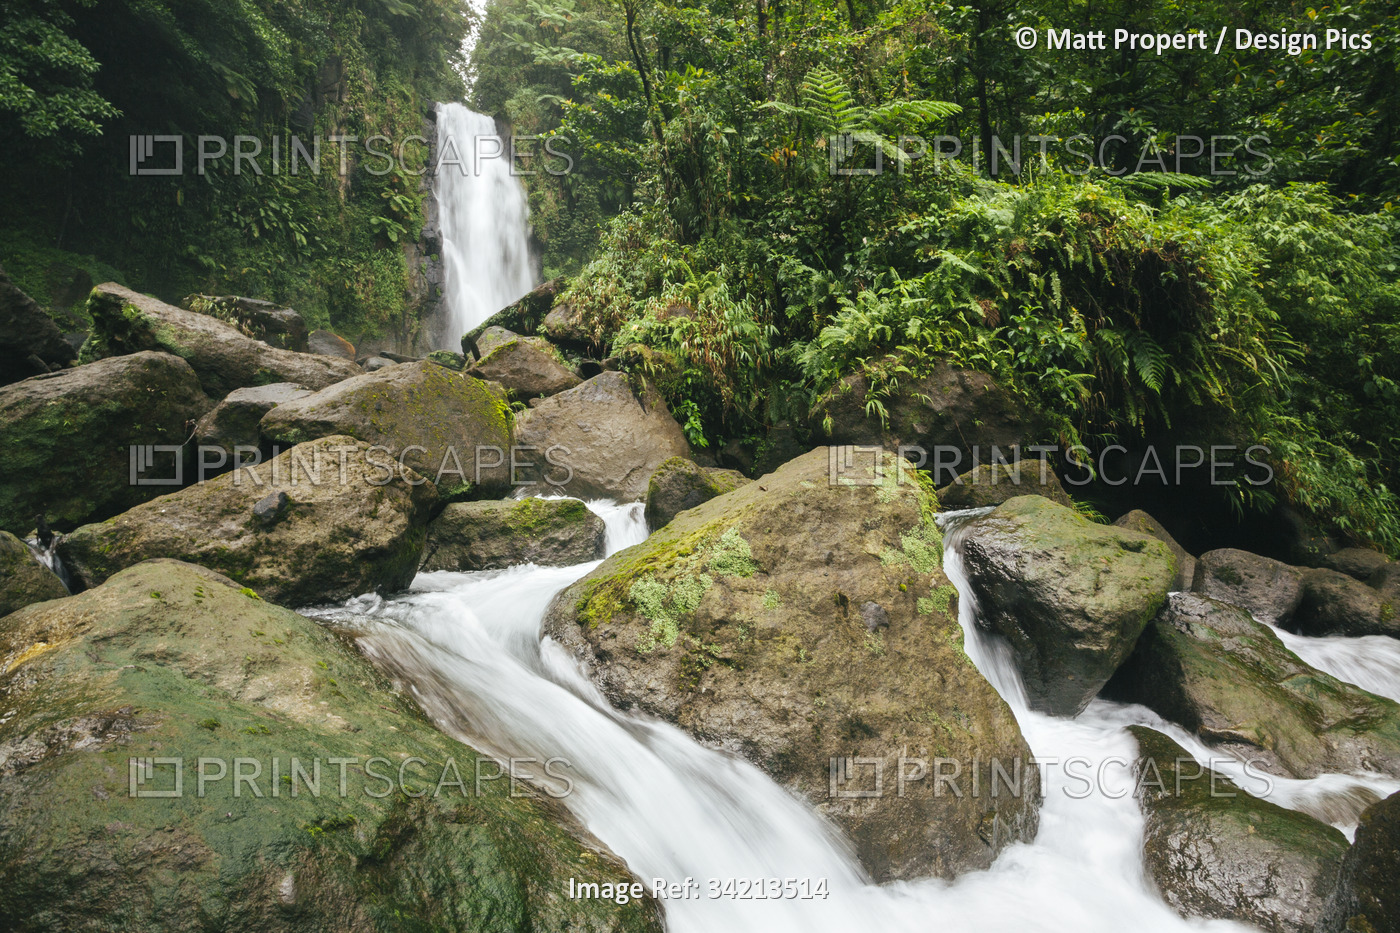 View of the lush vegetation and rushing water of Trafalgar Falls on the ...